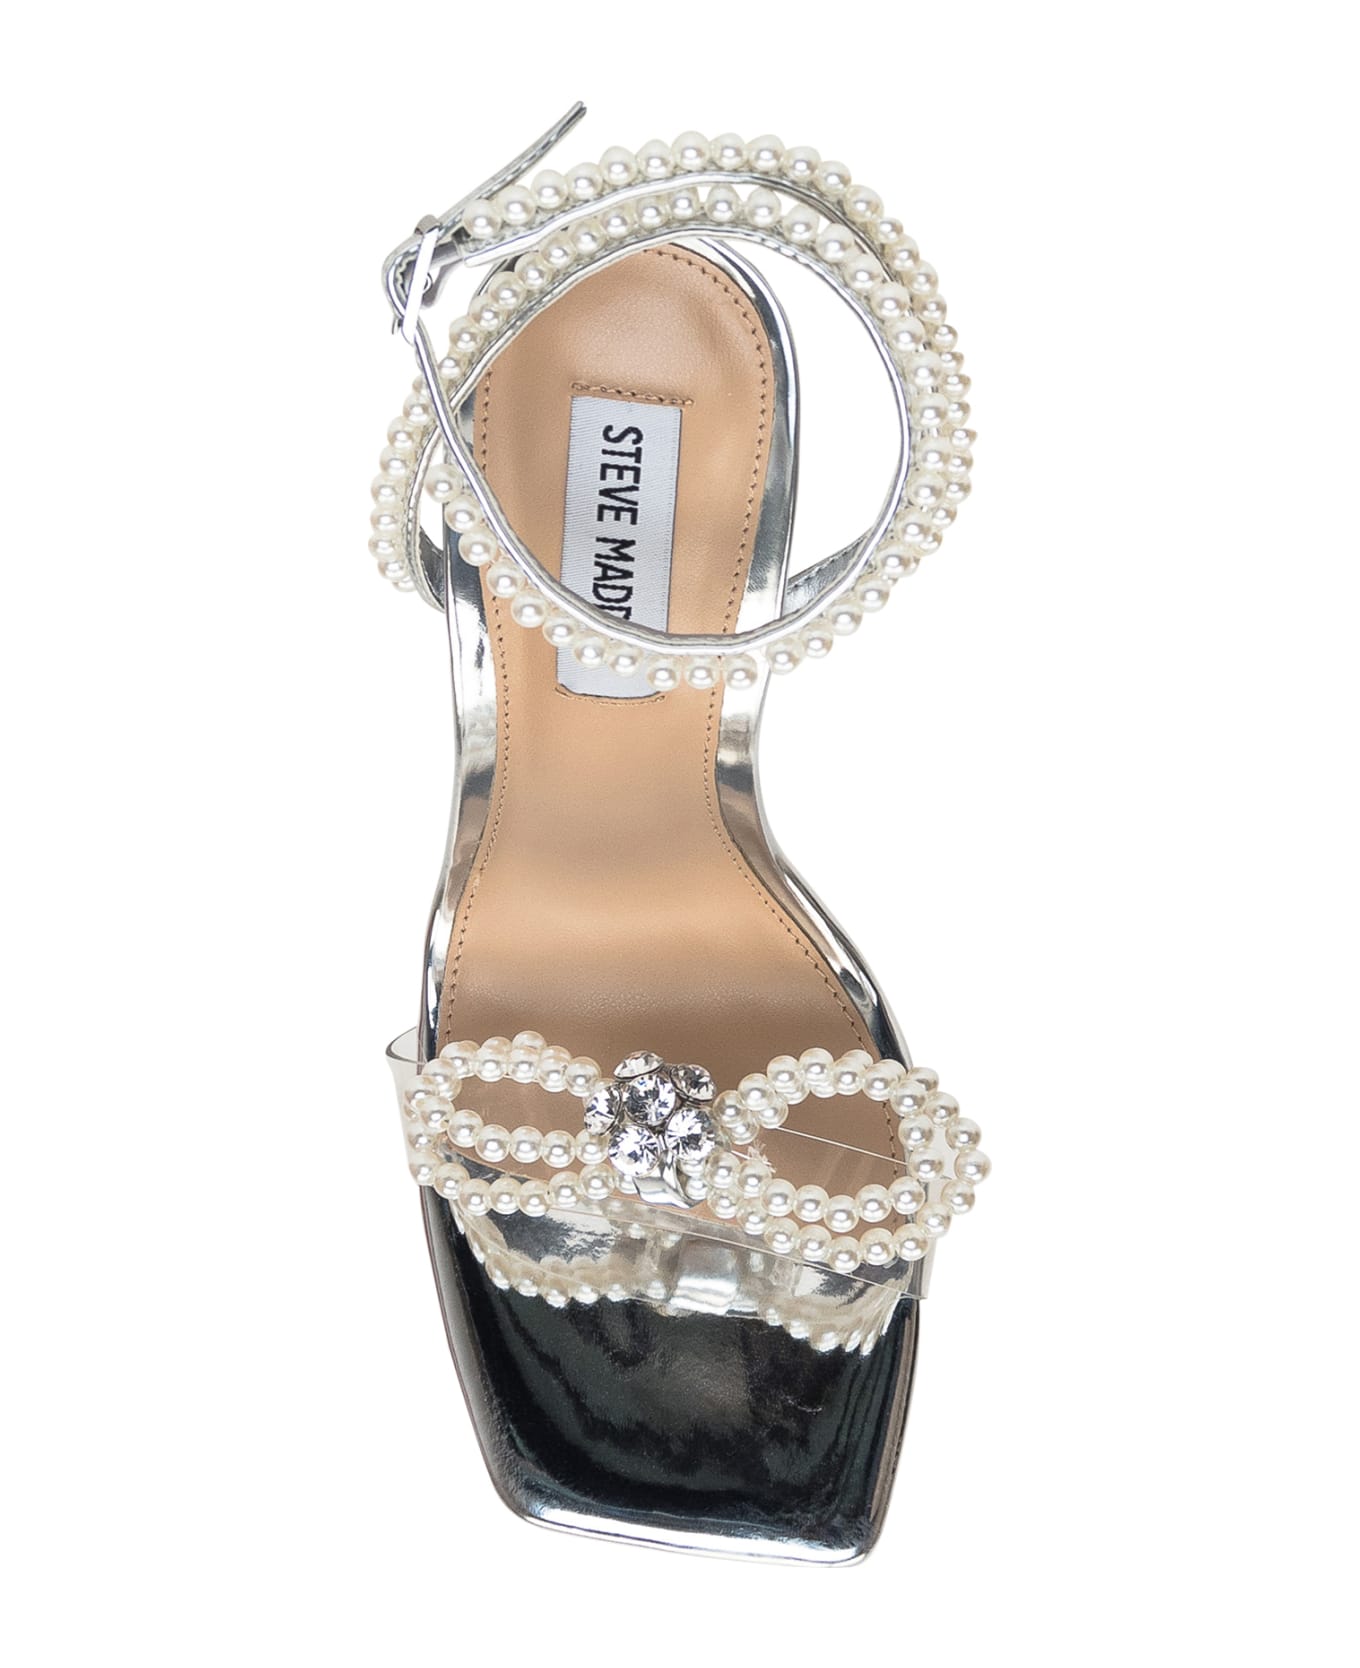 Steve Madden Sandal With Pearls - SILVER